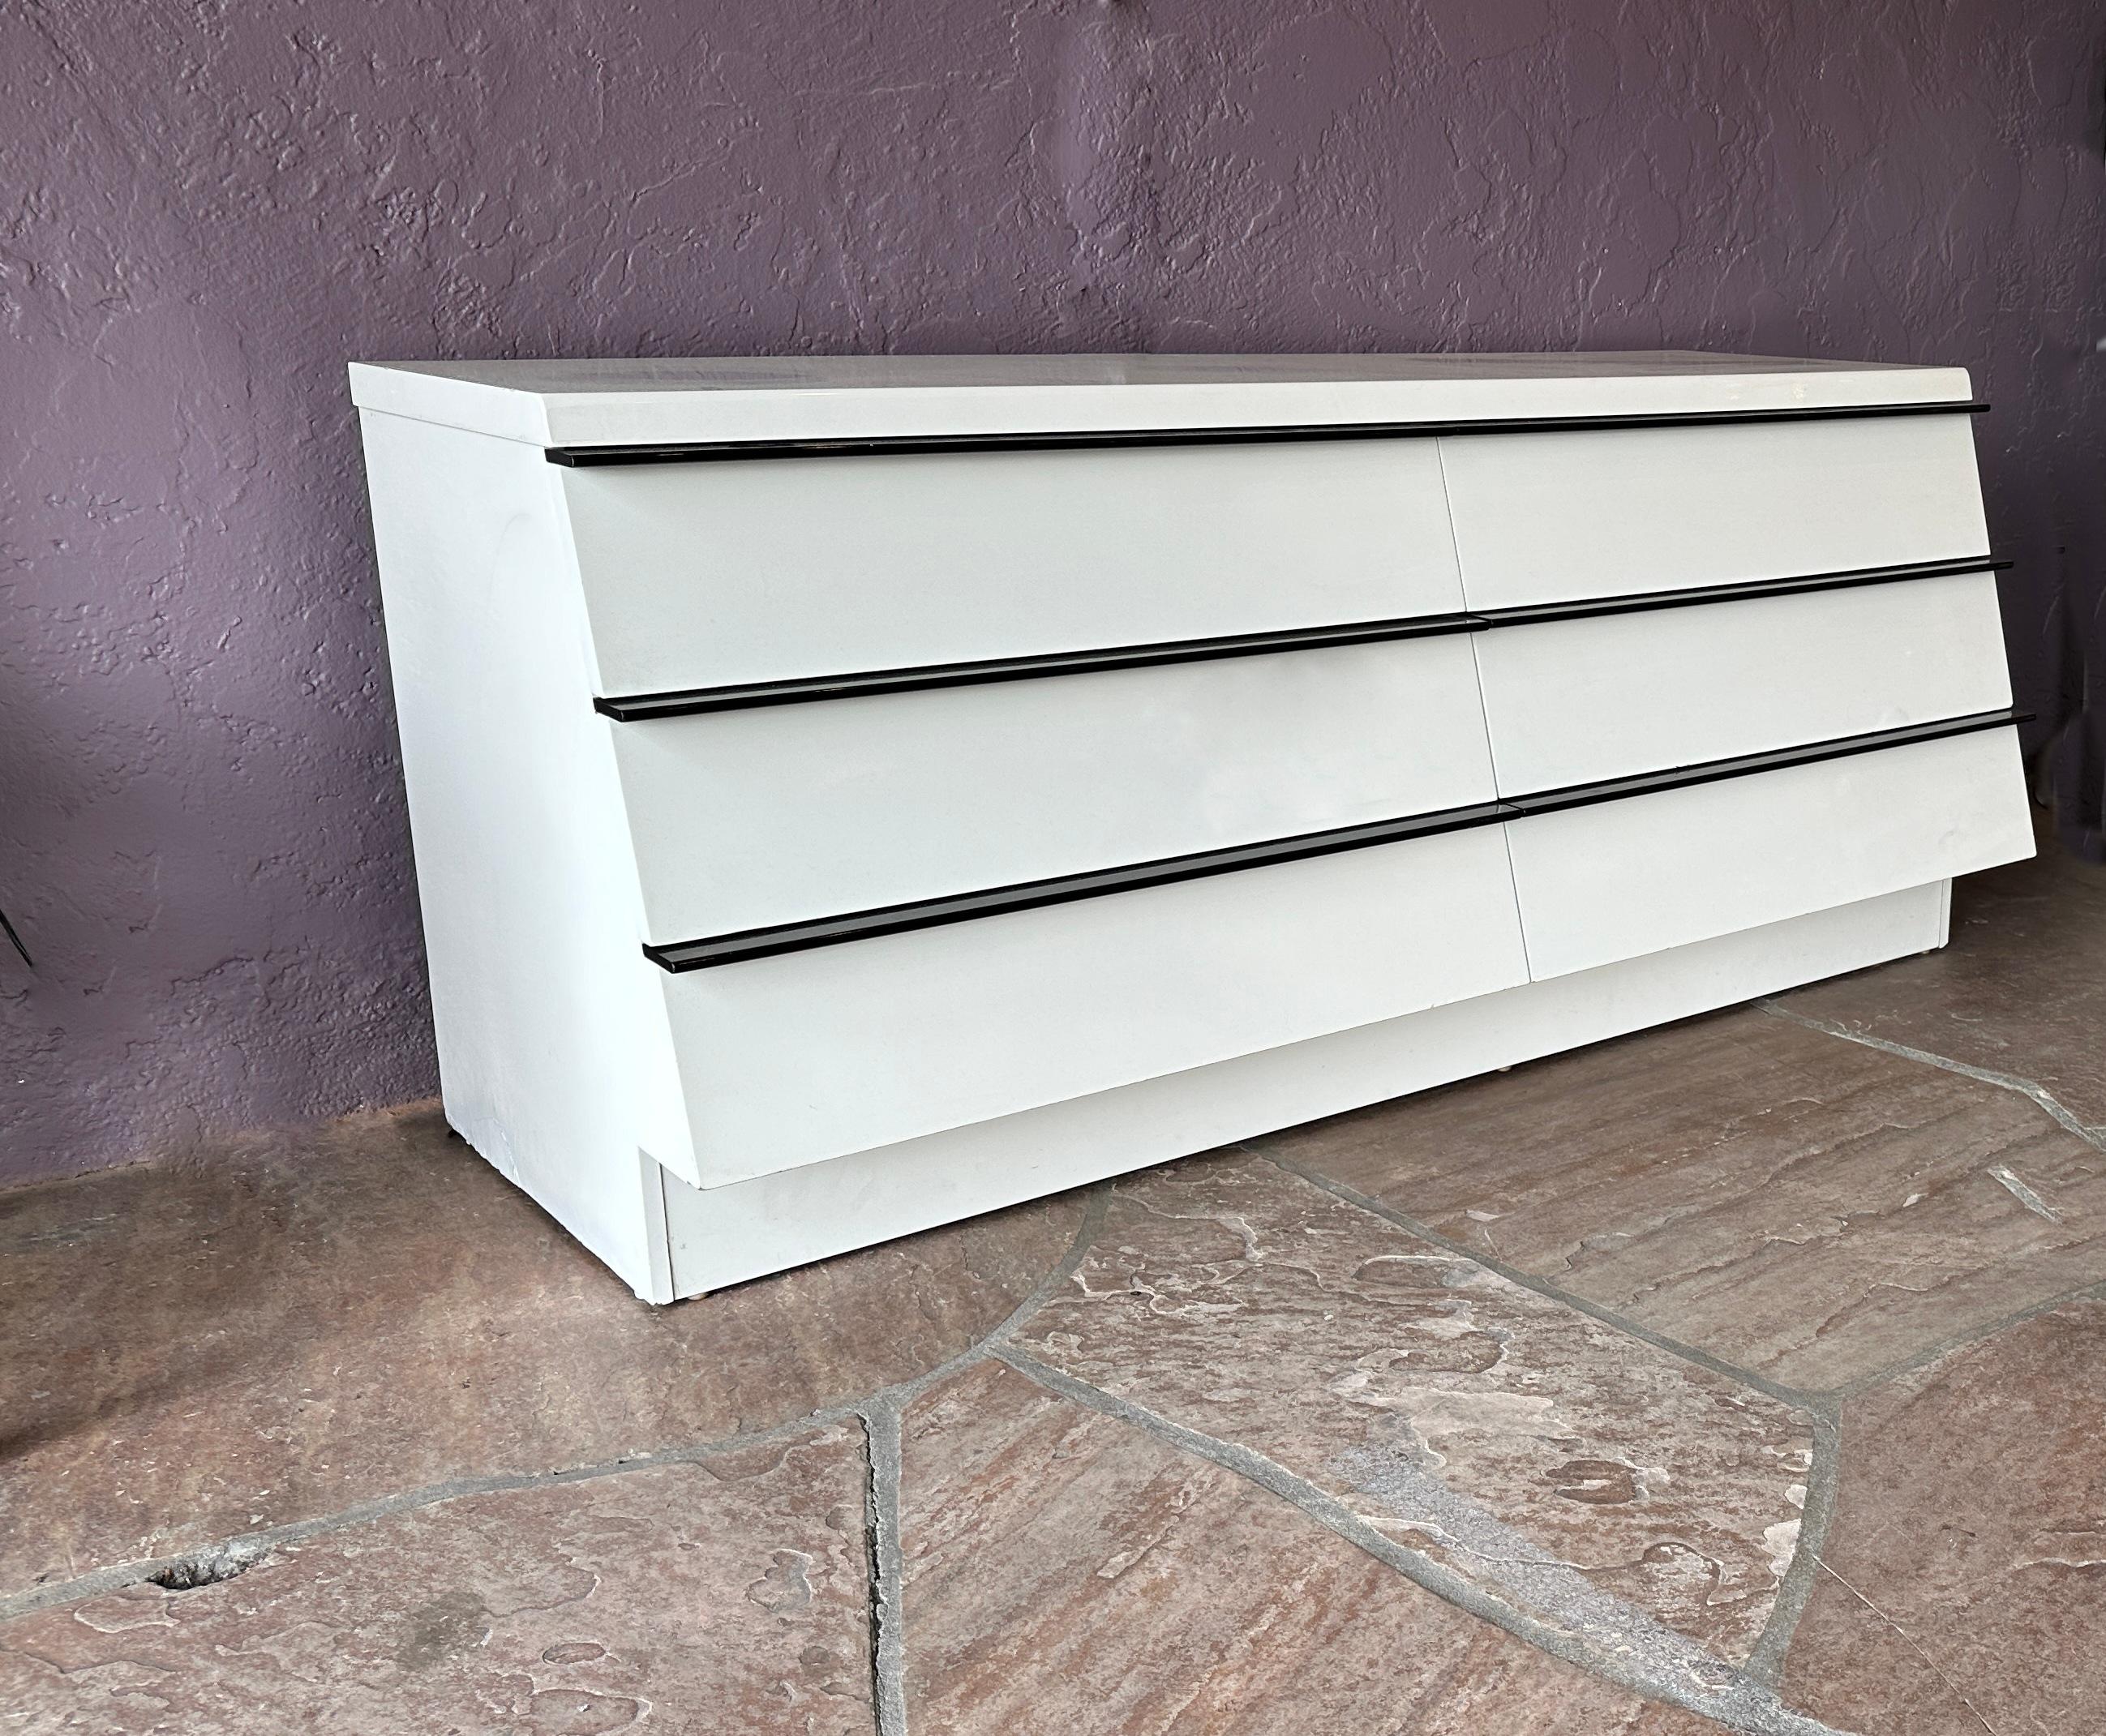 This white lacquered dresser  from the 1980s, reminiscent of the Roger Rougier style, boasts a unique feature: contrasting black handle accents adorning six stairs-stepped drawers .

With its refined high-gloss finish, the dresser's appeal lies in